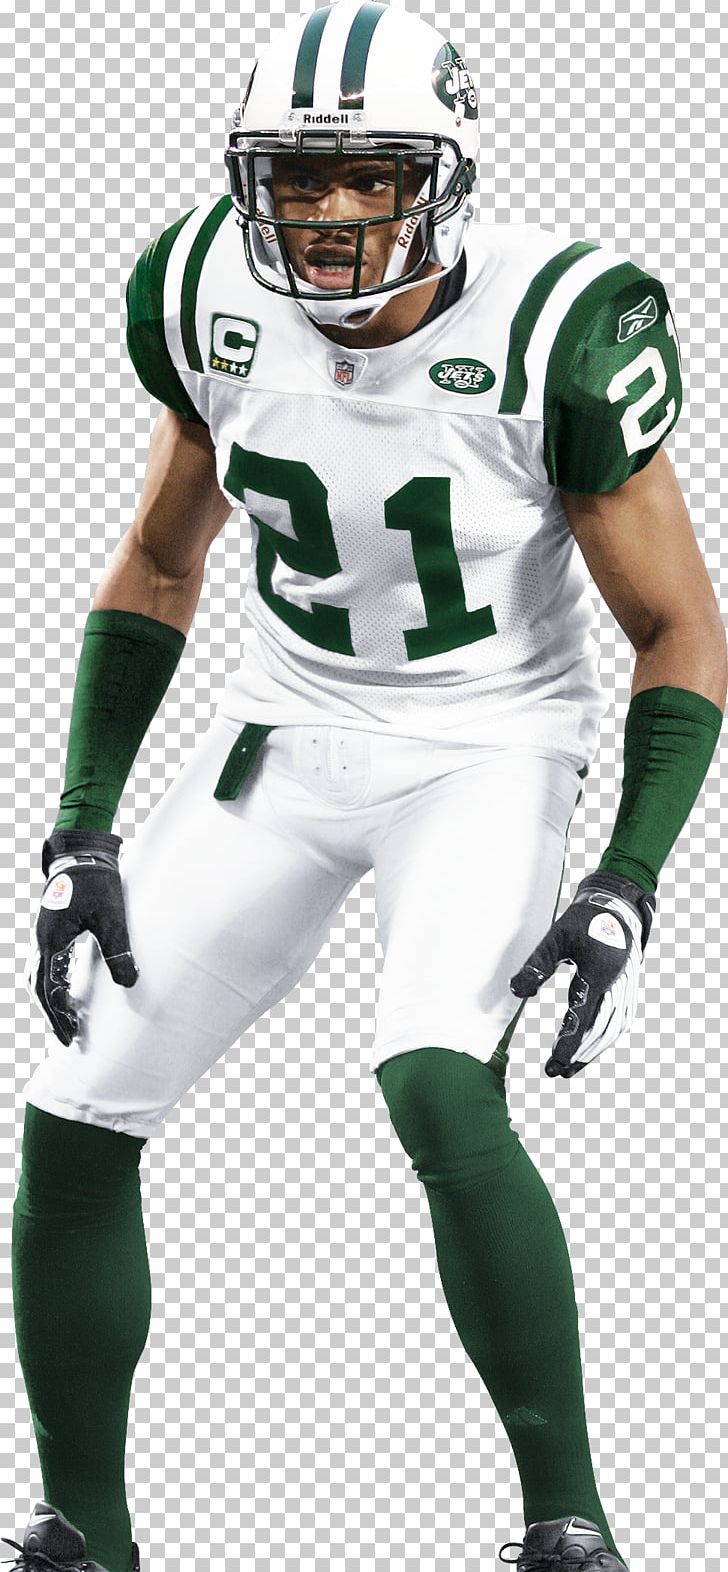 American Football Protective Gear American Football Helmets Gridiron Football Protective Gear In Sports PNG, Clipart, Act, Competition Event, Face Mask, Jersey, Lacrosse Protective Gear Free PNG Download